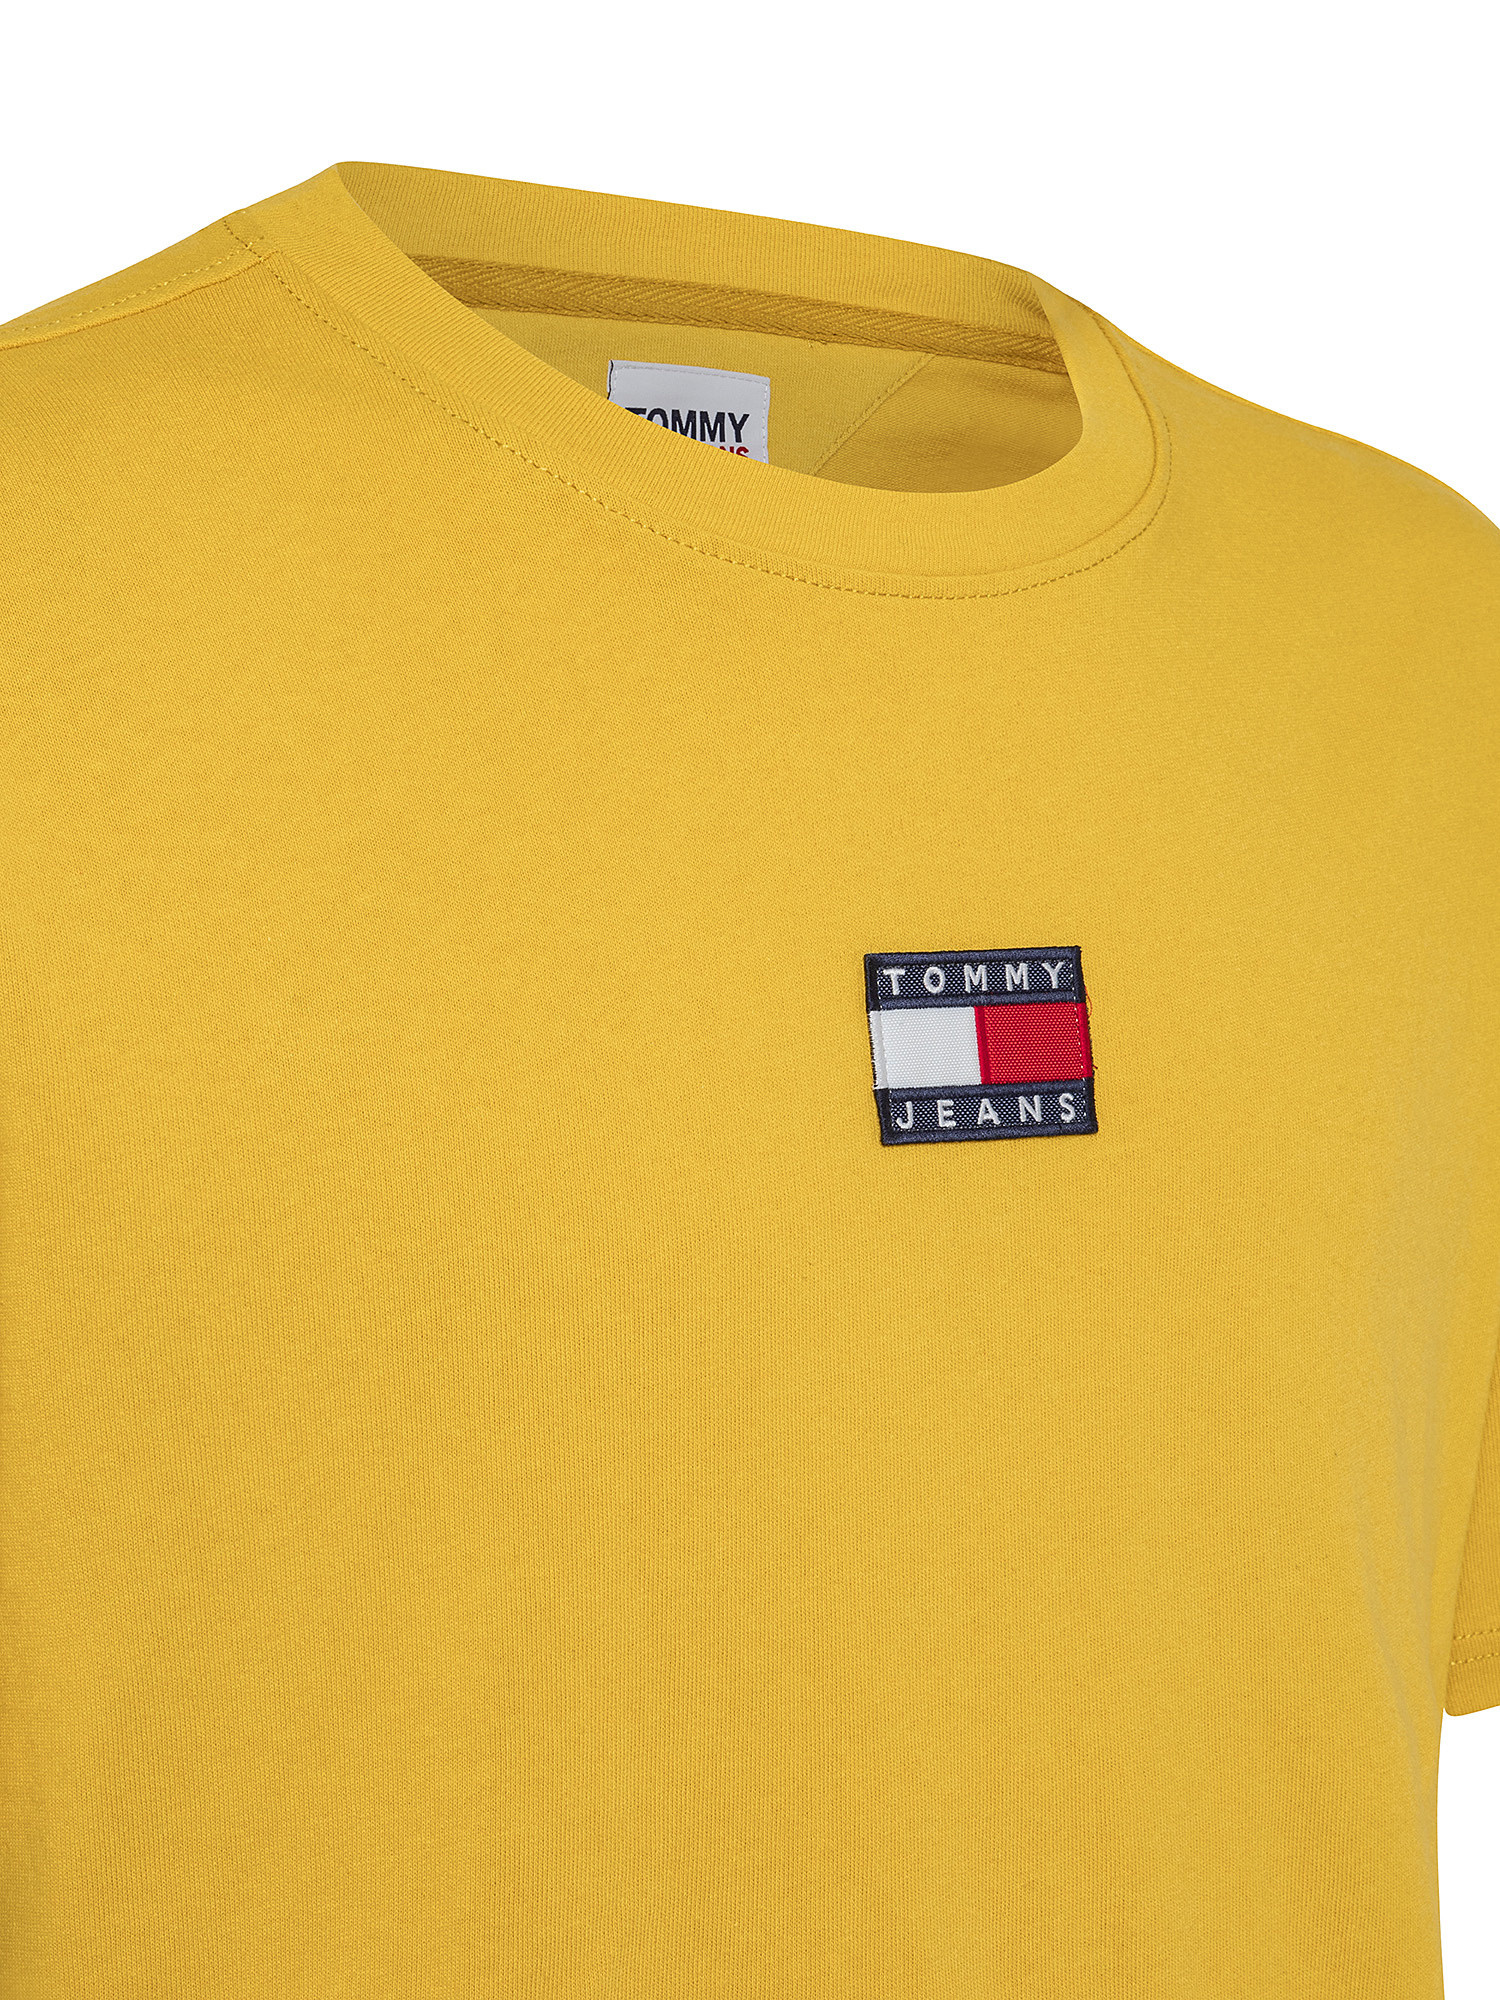 Tommy Jeans - Crewneck T-shirt with logo, Yellow, large image number 2